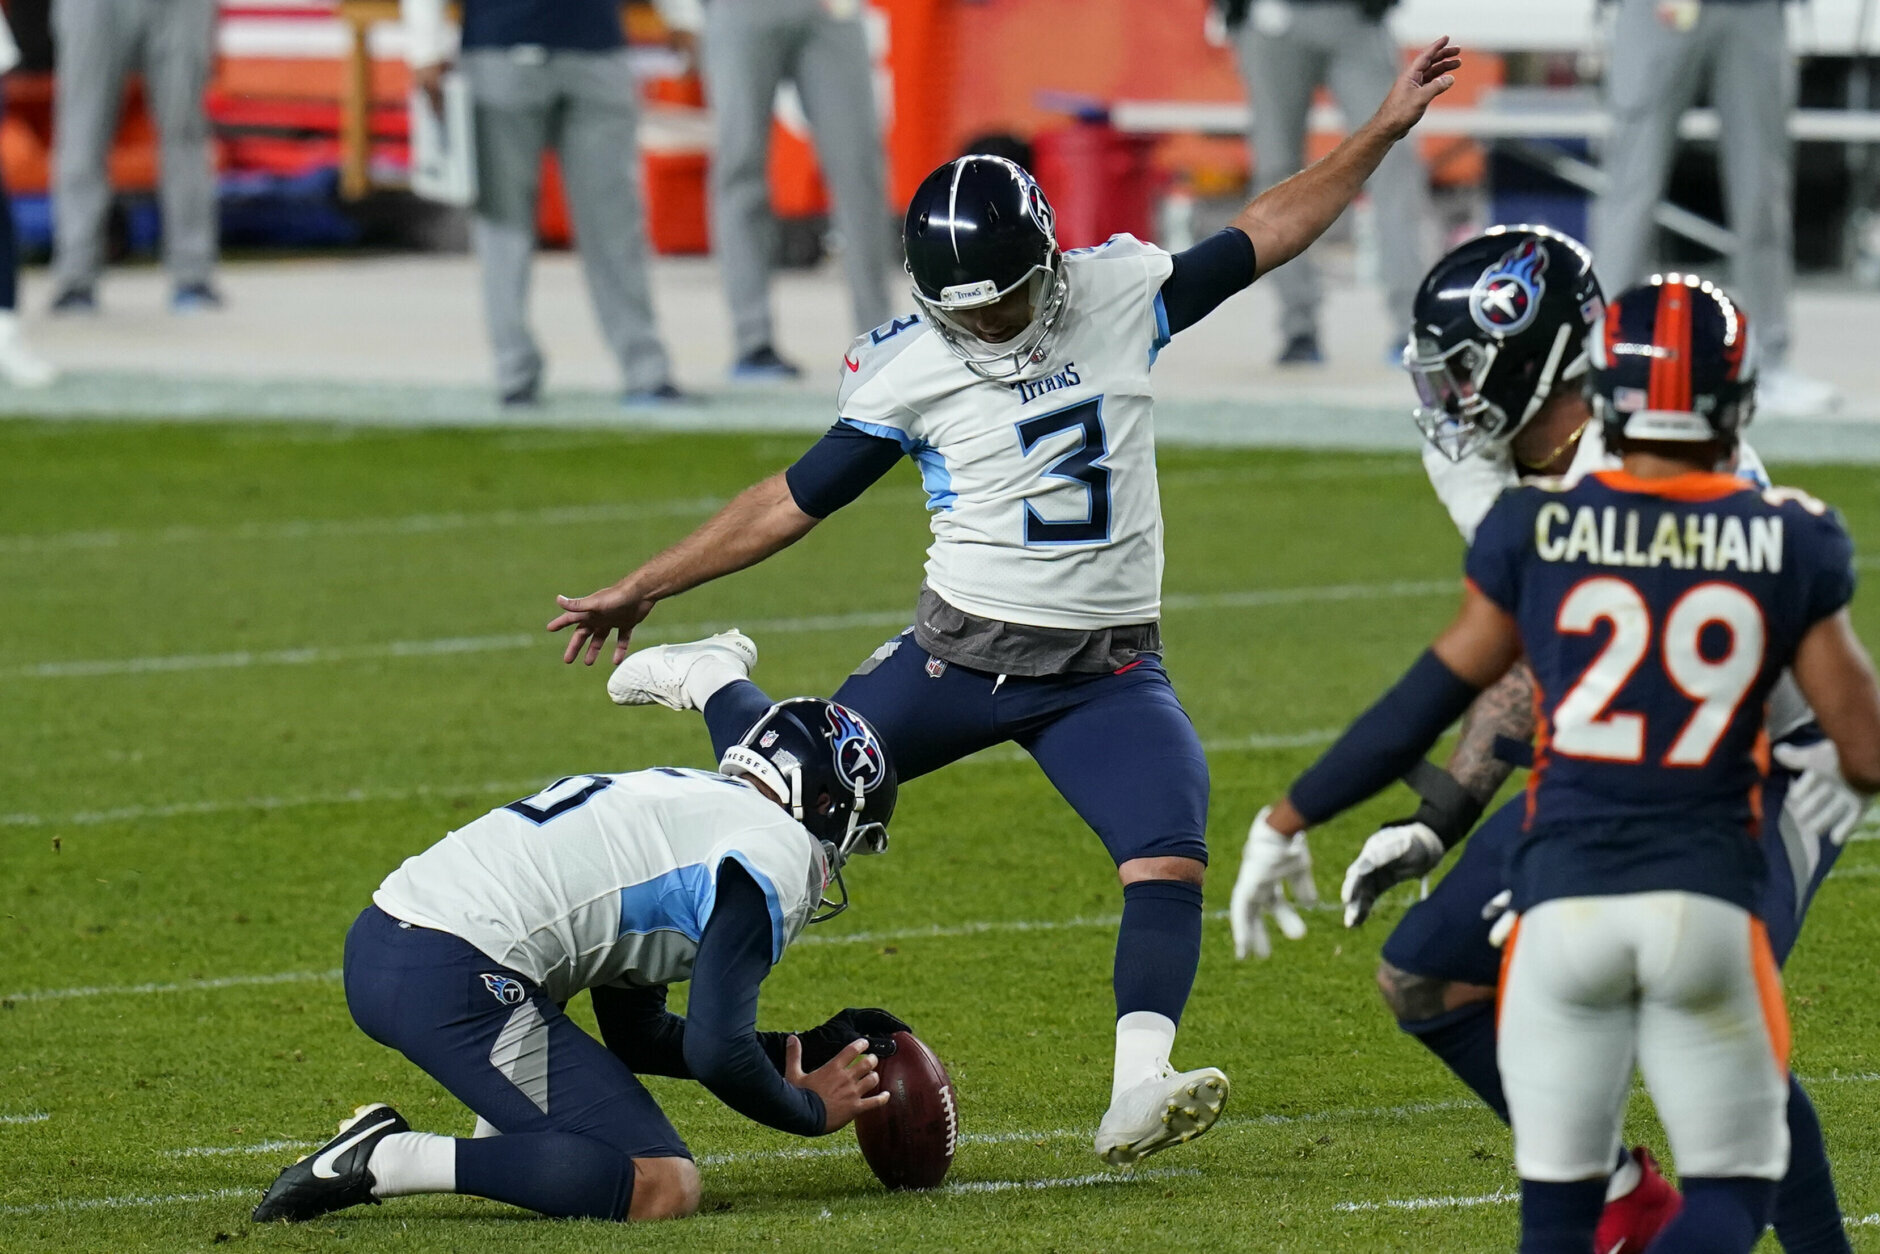 <p><b><i>Titans 16</i></b><br />
<b><i>Broncos 14</i></b></p>
<p>On this night, redemption was spelled G-O-S-T &#8230; you get the idea. Stephen Gostkowski missed three field goals in a game for the first time in his career, and an extra point to leave 10 points on the field in Denver &#8212; but he hit the one that counted most to save the day for Tennessee. It&#8217;ll be interesting to see if it&#8217;s enough to save his job.</p>
